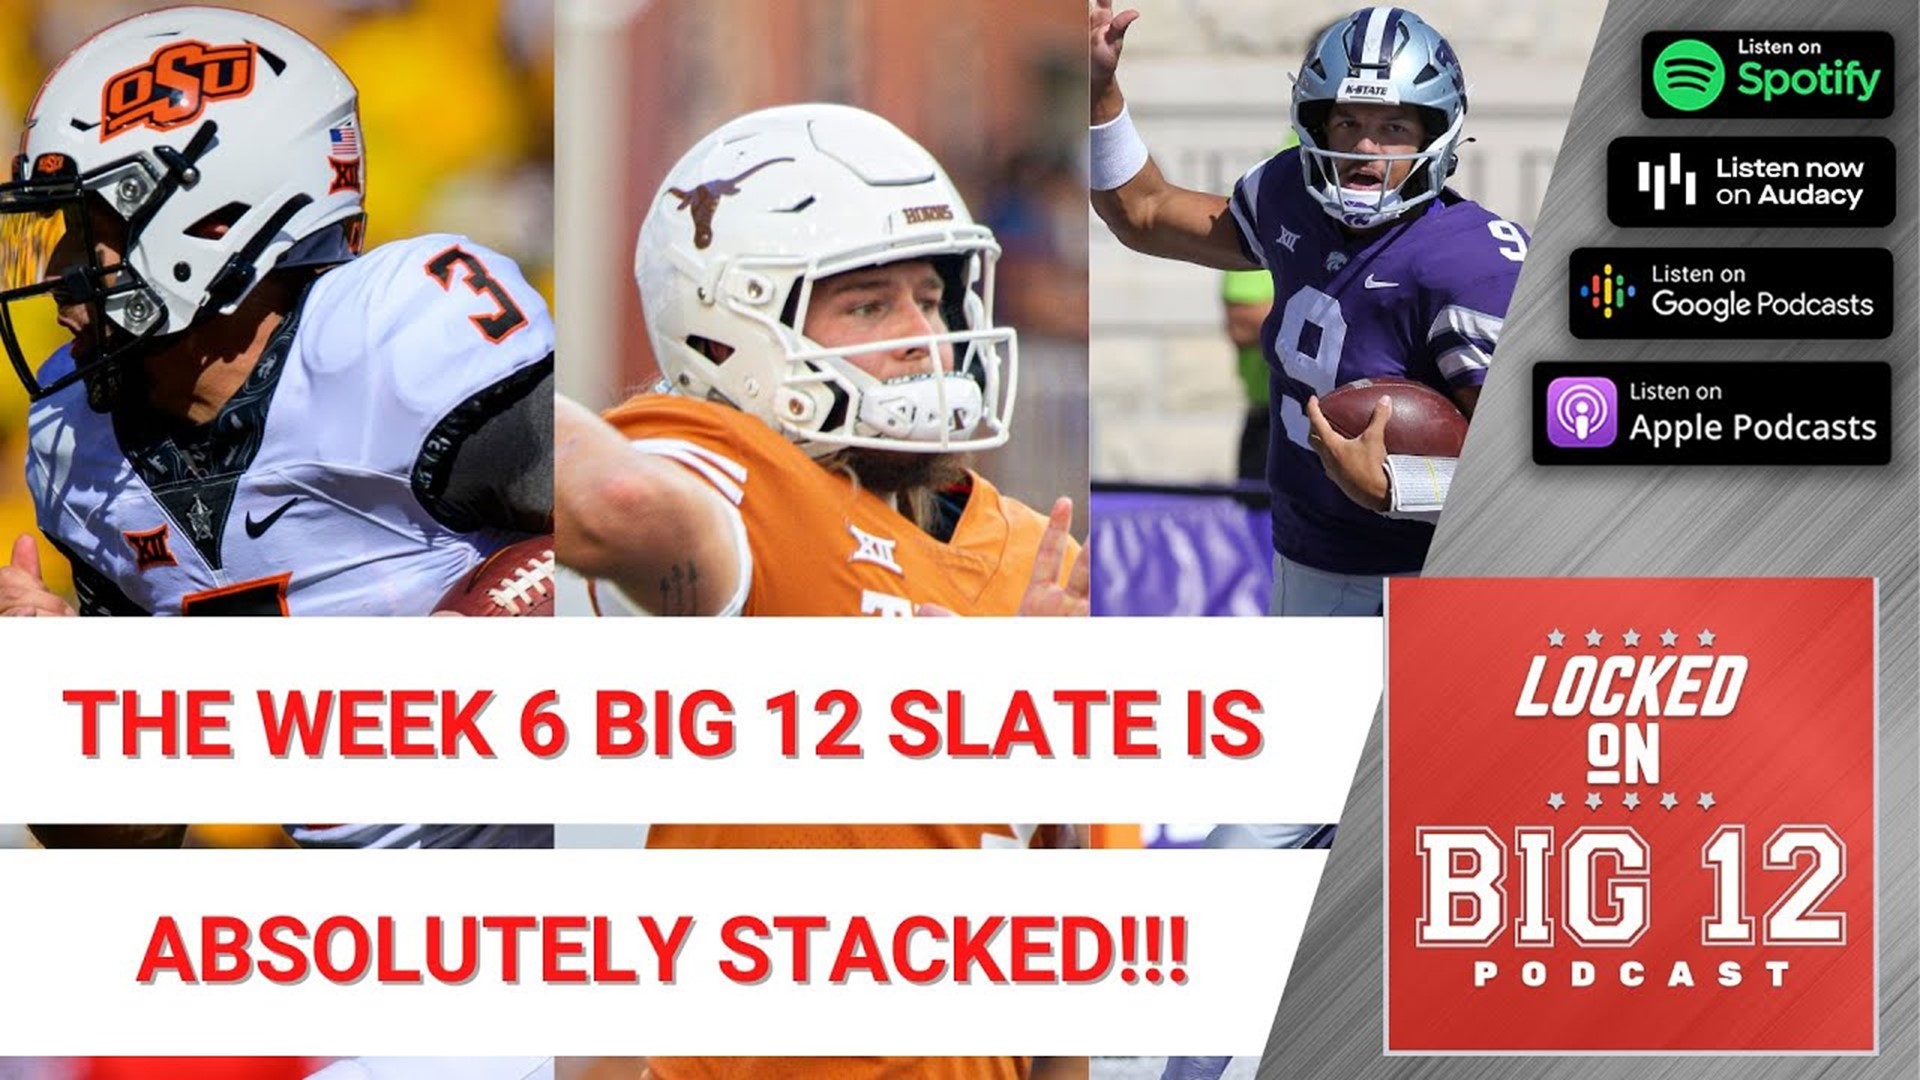 College Gameday, Top 20 Matchups, Red River & Farmageddon - Week 6 In The Big 12 Has It All!